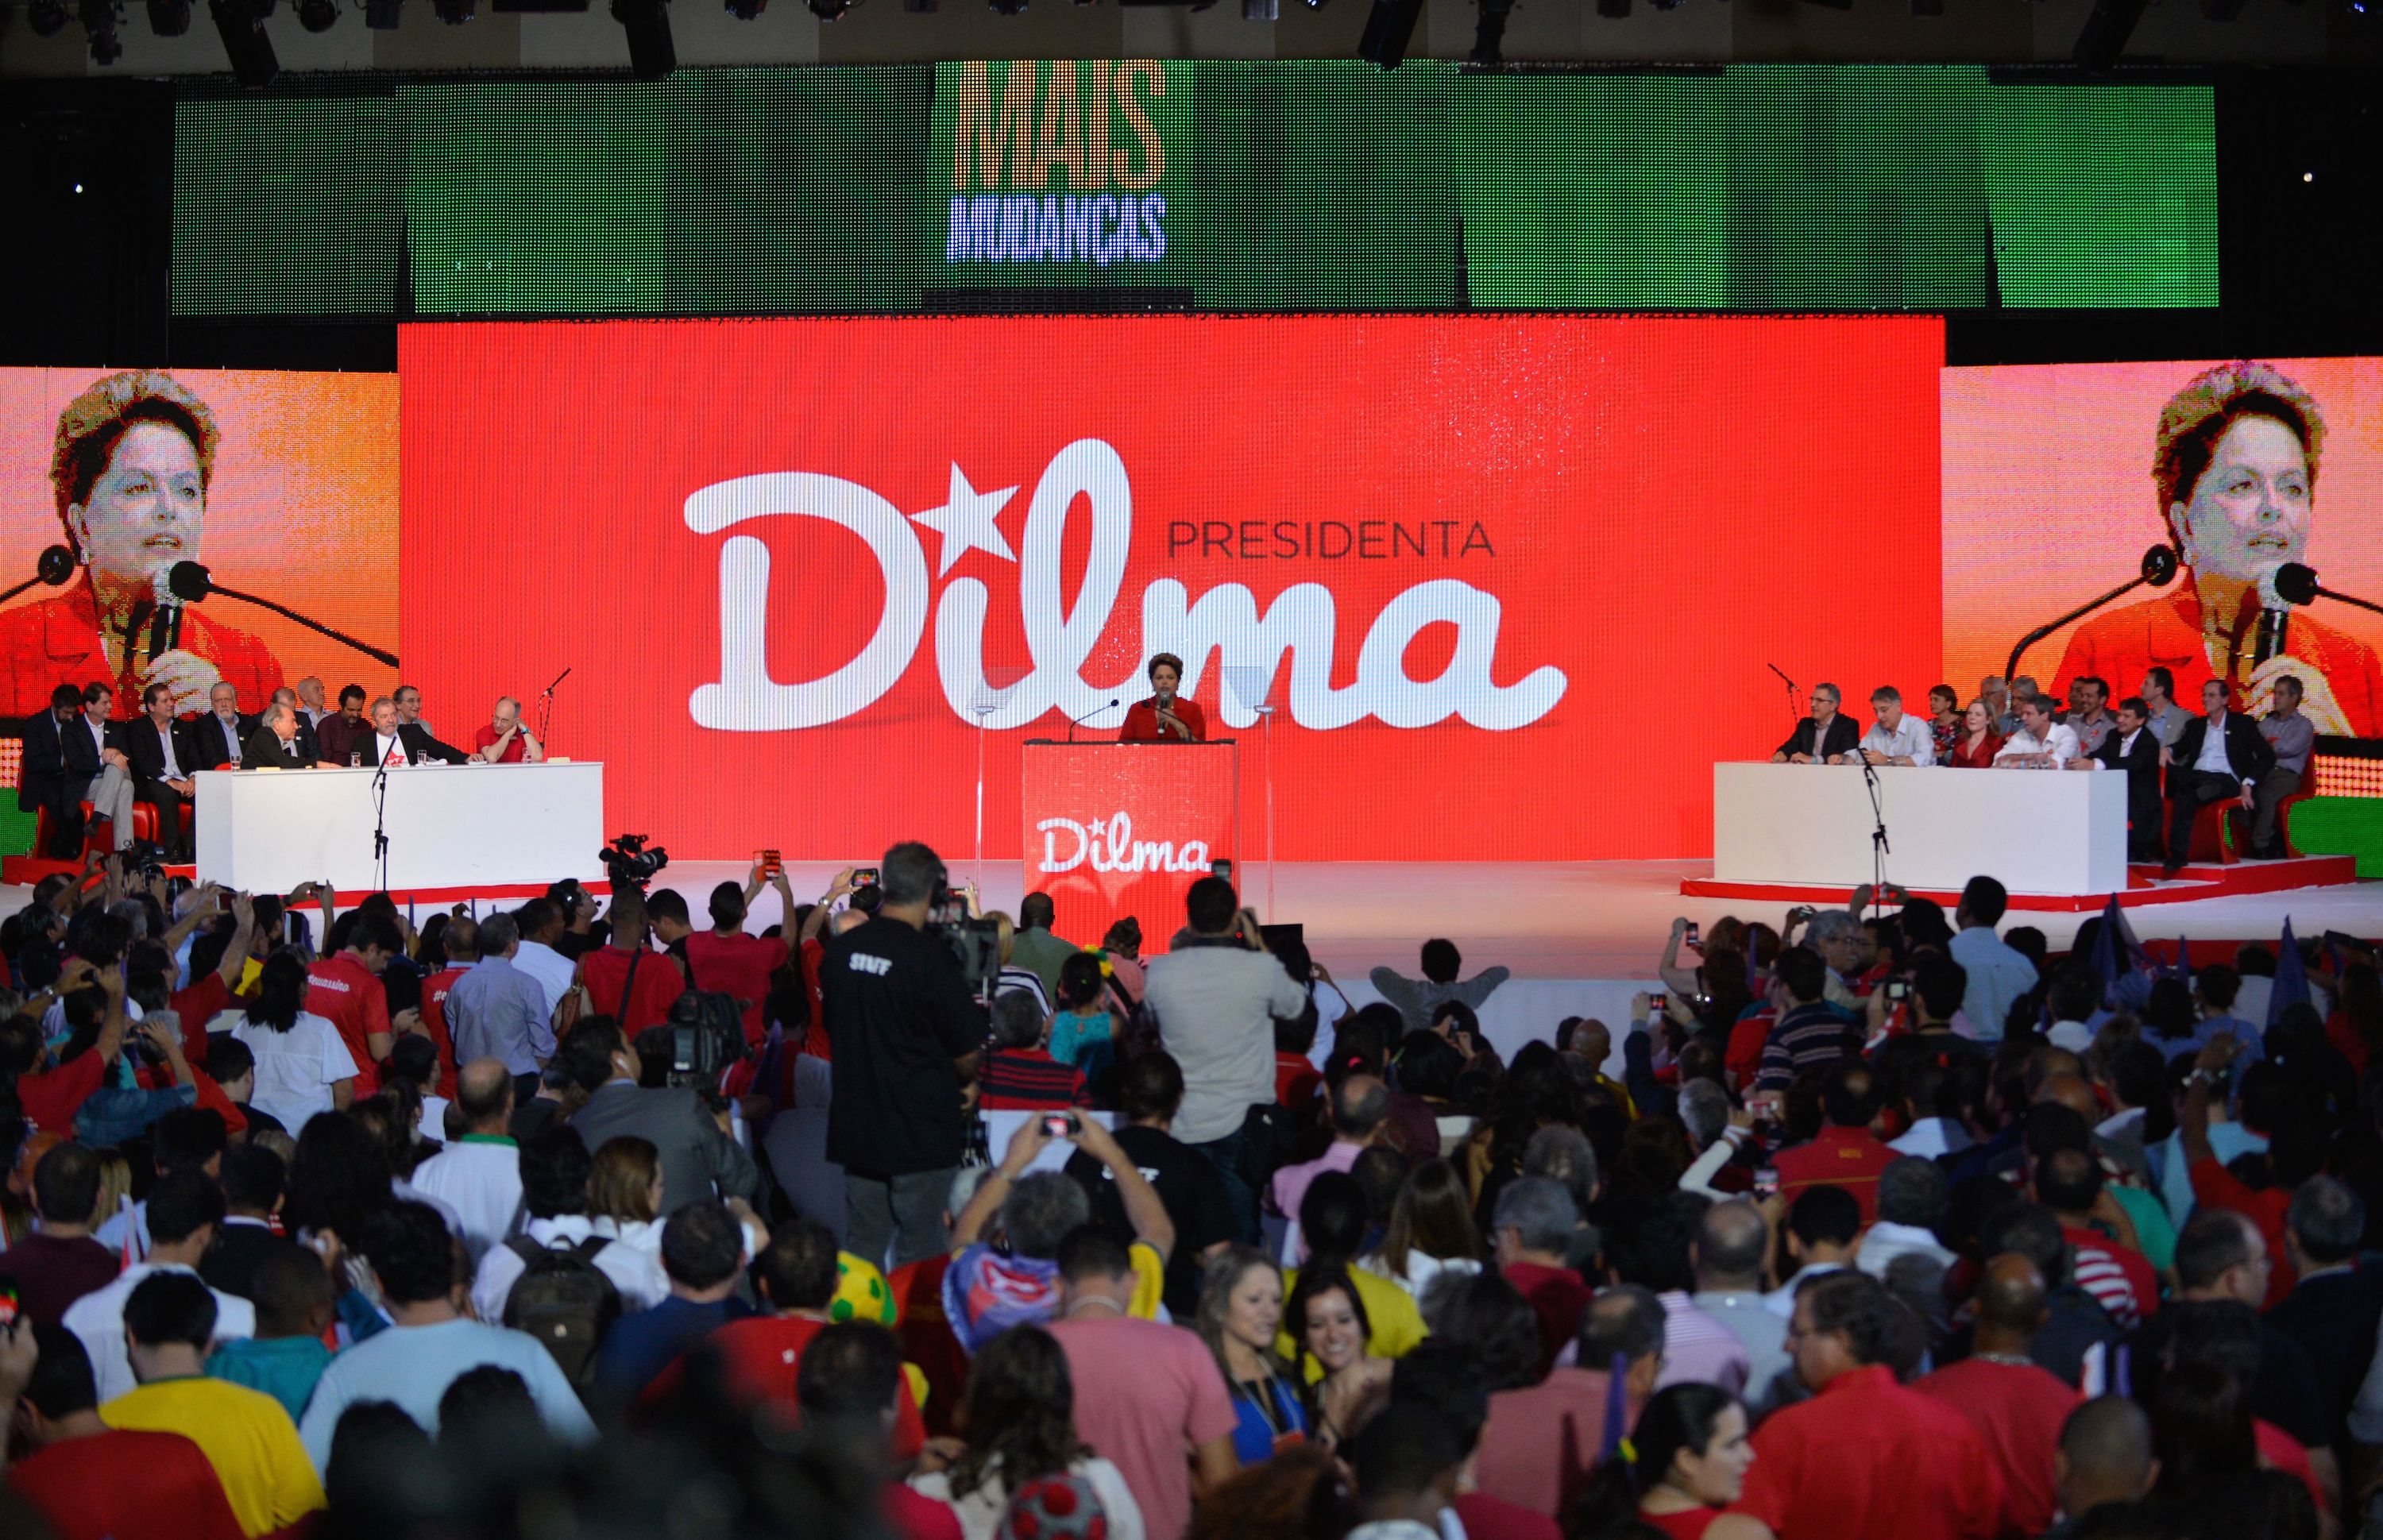 Dilma Rousseff Announced as PT 2014 Presidential Candidate